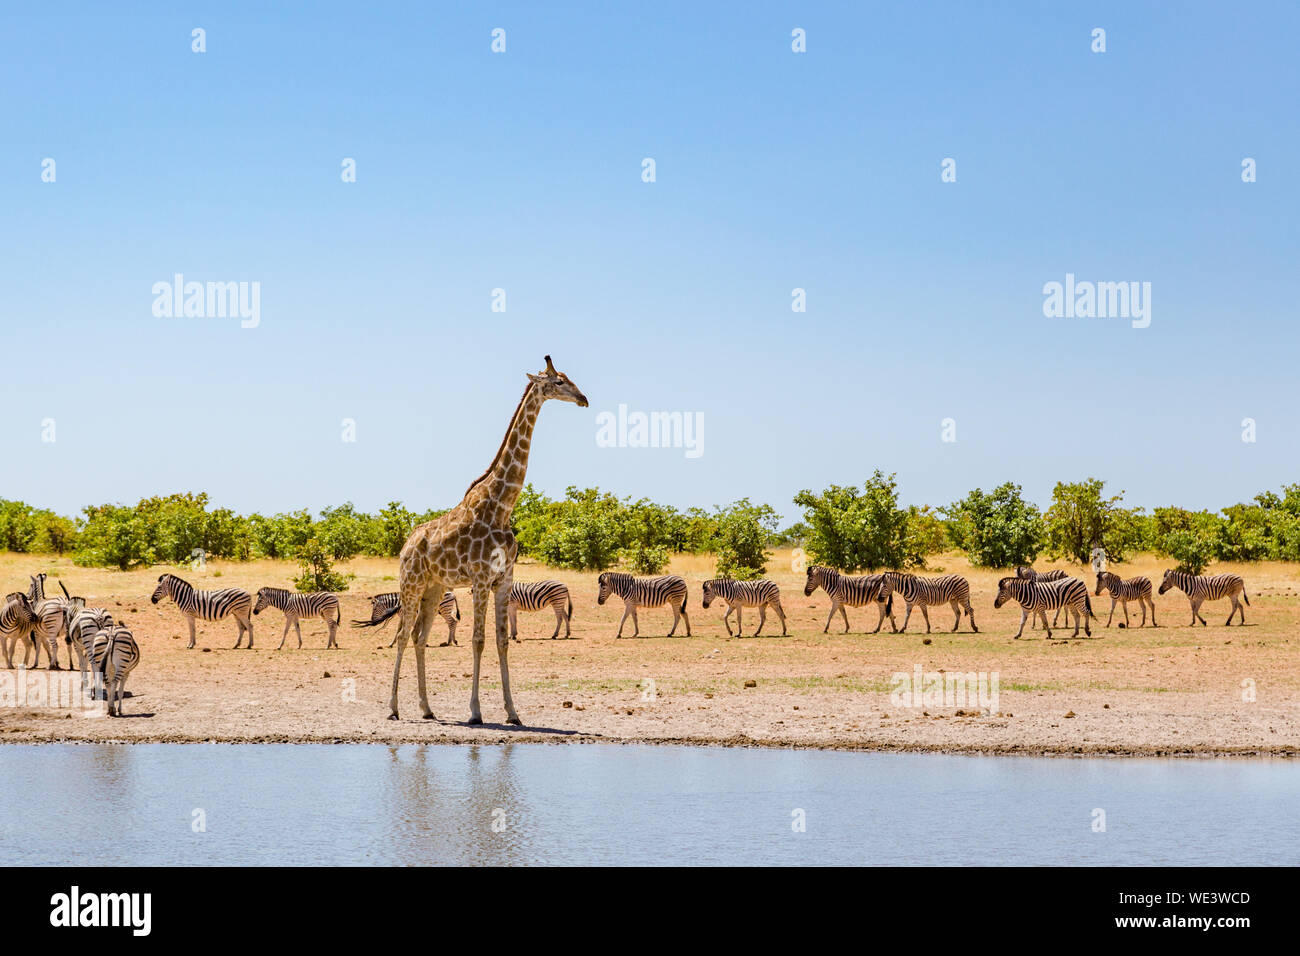 one natural giraffe and group of zebras standing at water in savanna Stock Photo